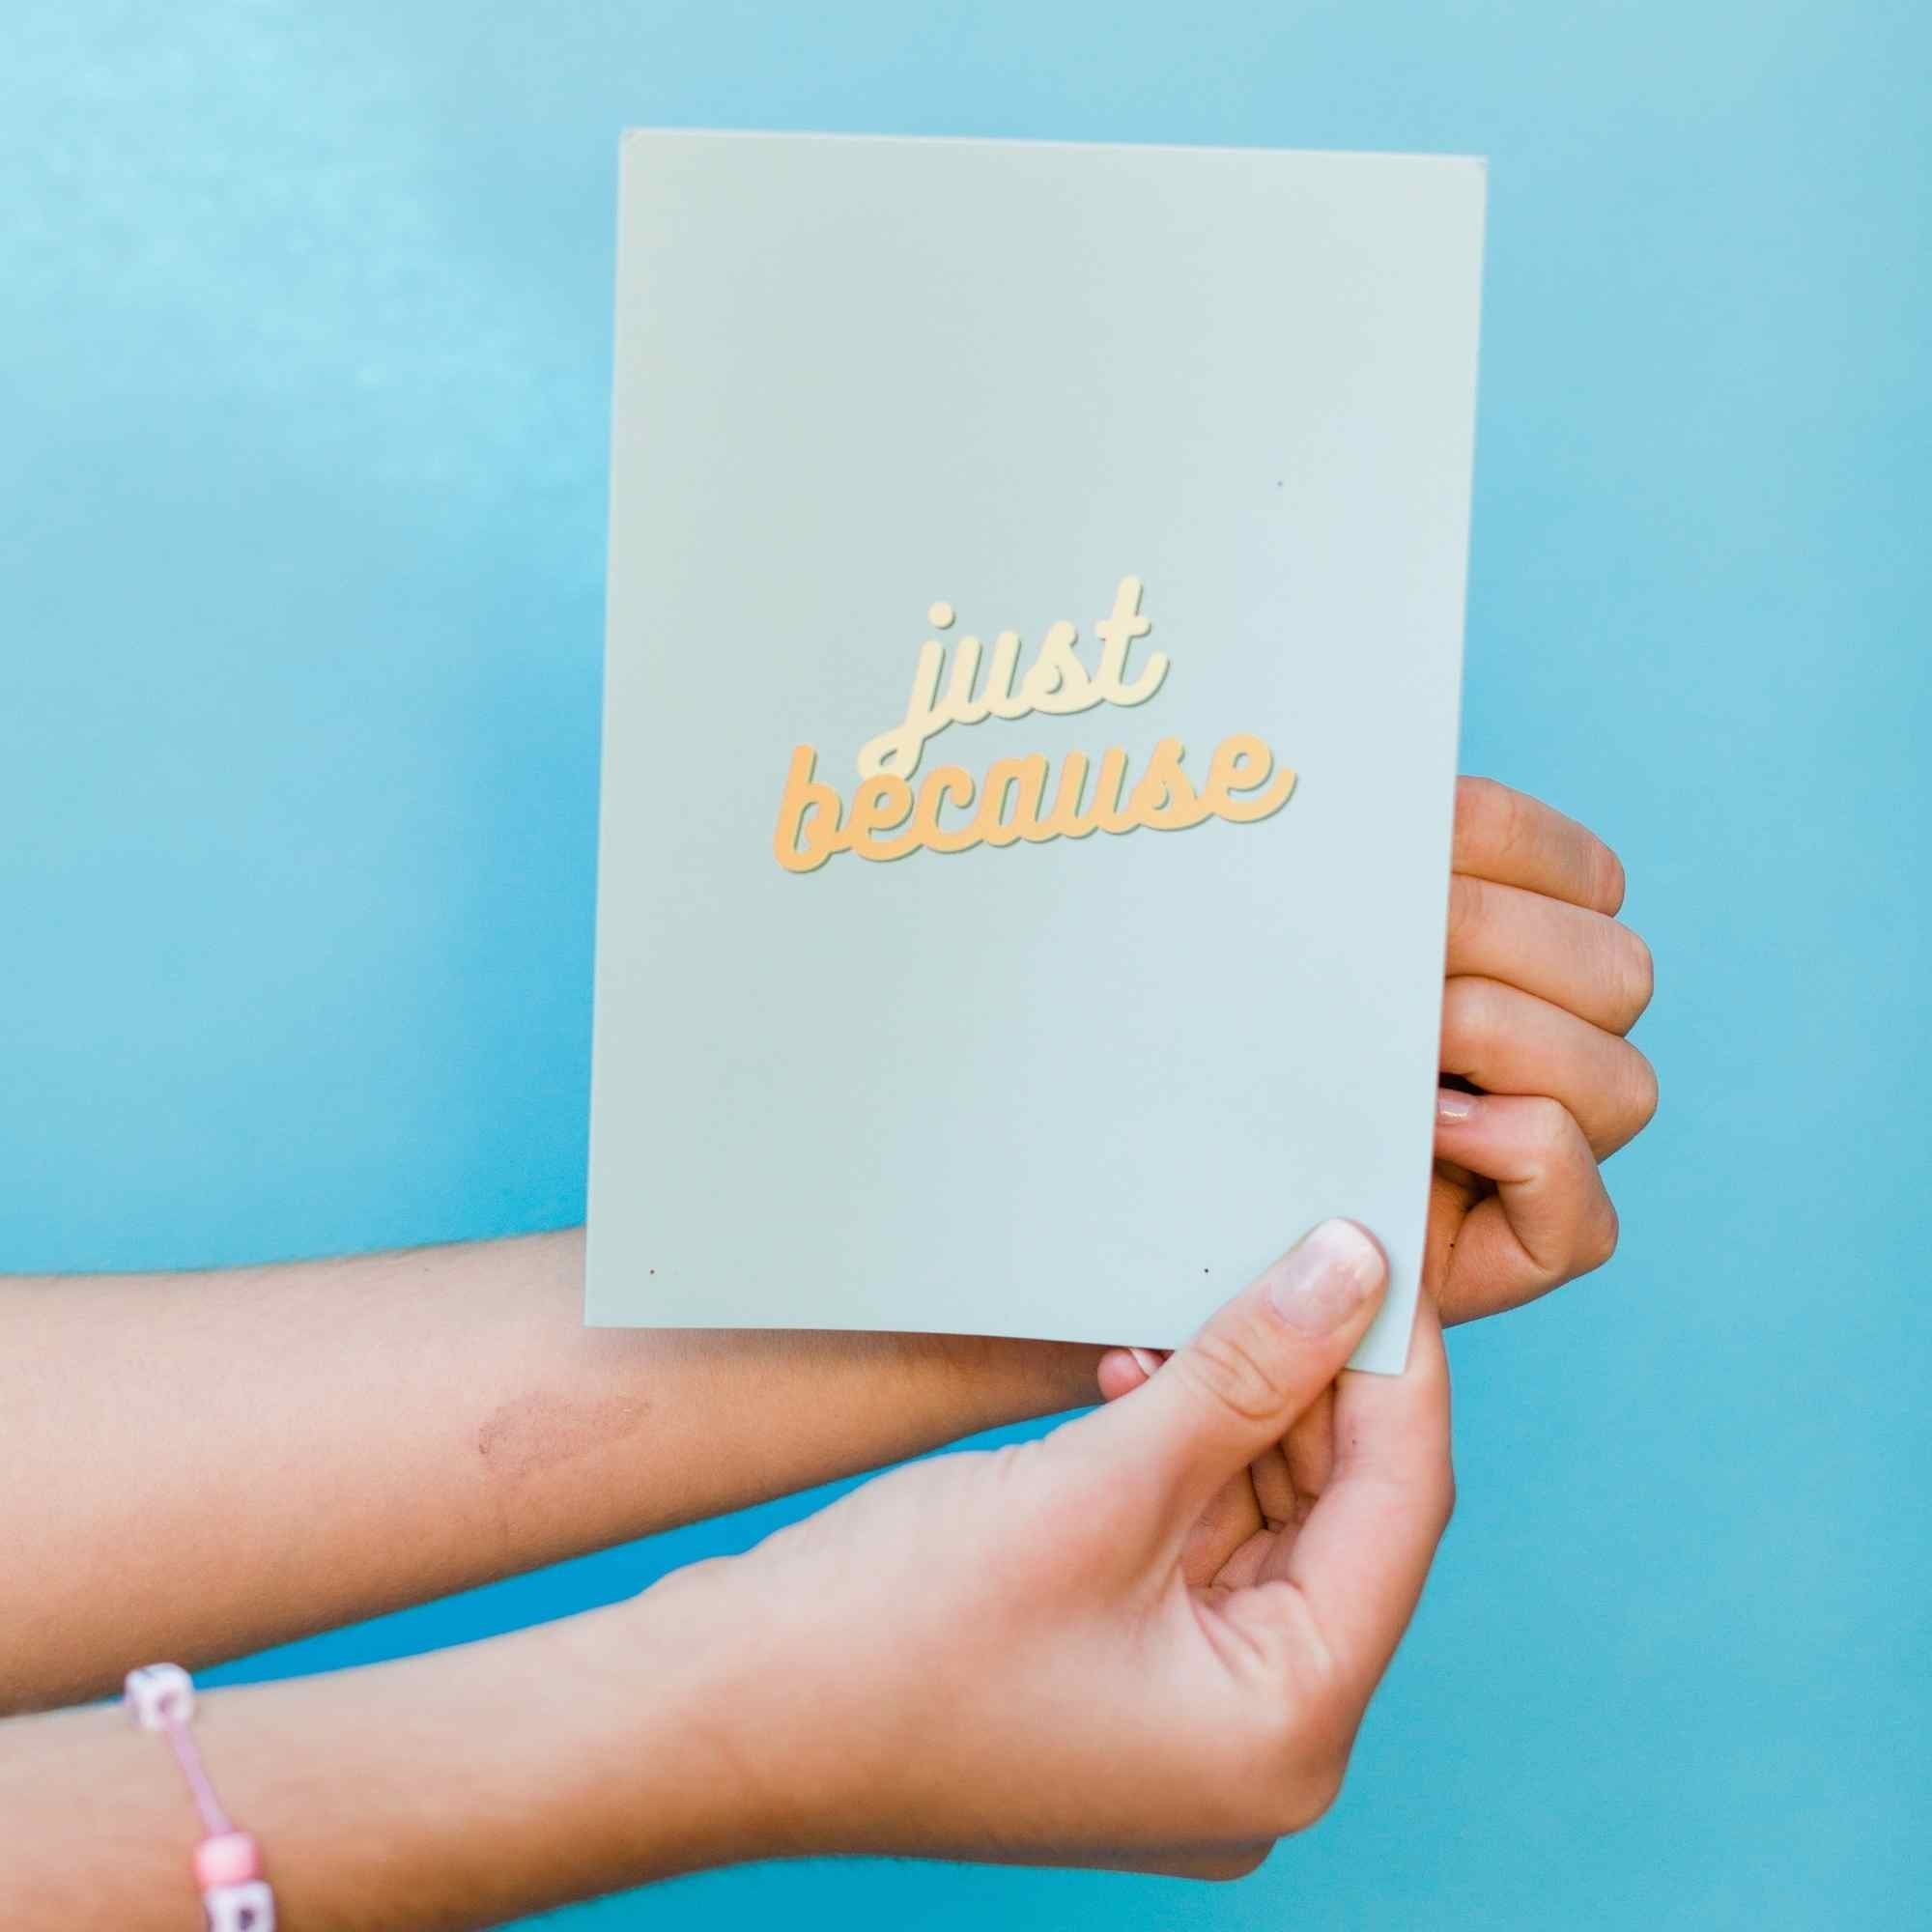 Just Because - Glitter Bomb Card Pranks Anonymous send hilarious pranks and gag gifts to your friends or family.